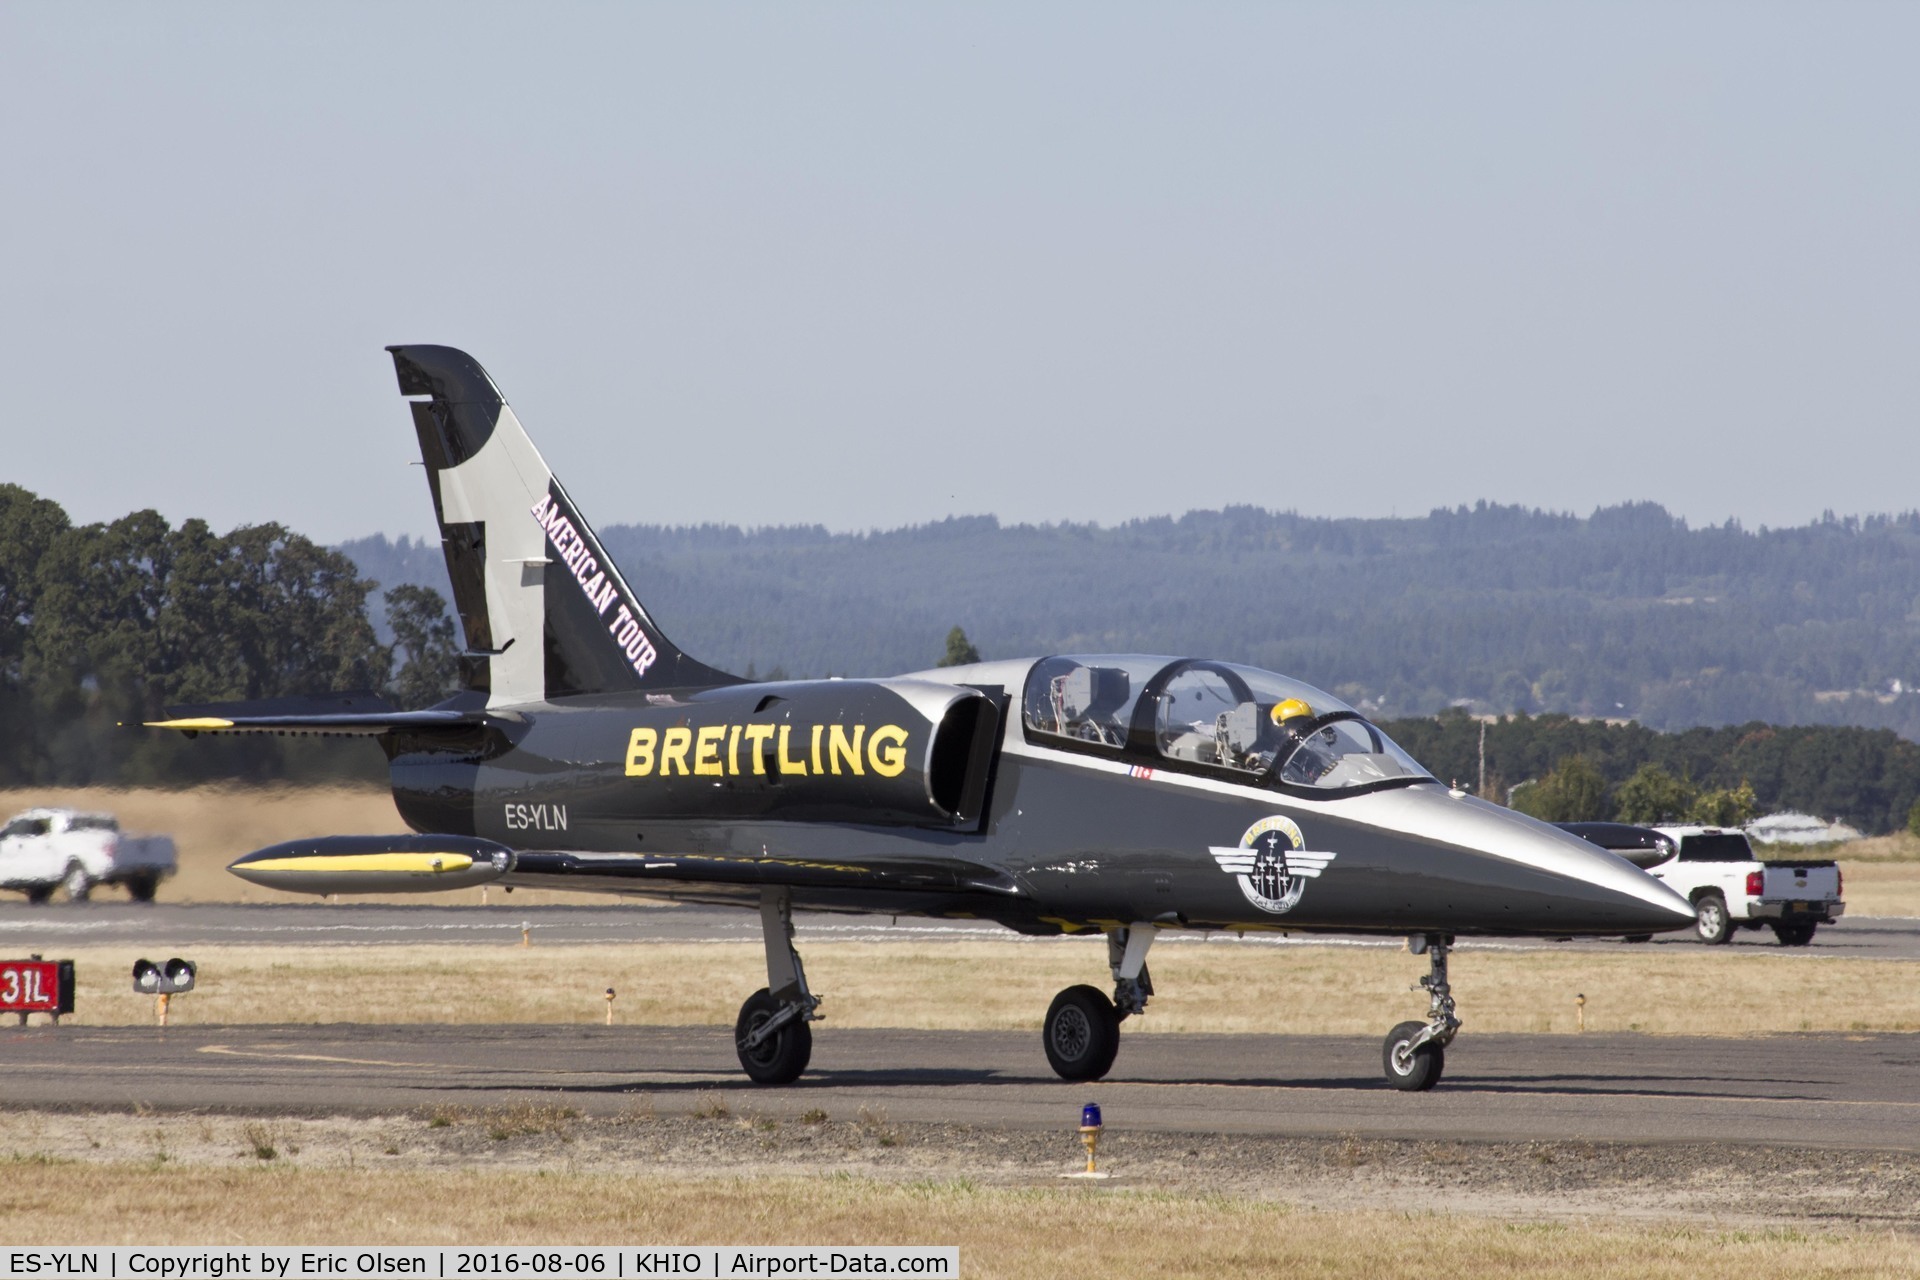 ES-YLN, Aero L-39C Albatros C/N 533637, Breitling #1 taxing back after their show during the 2016 Oregon International Airshow.